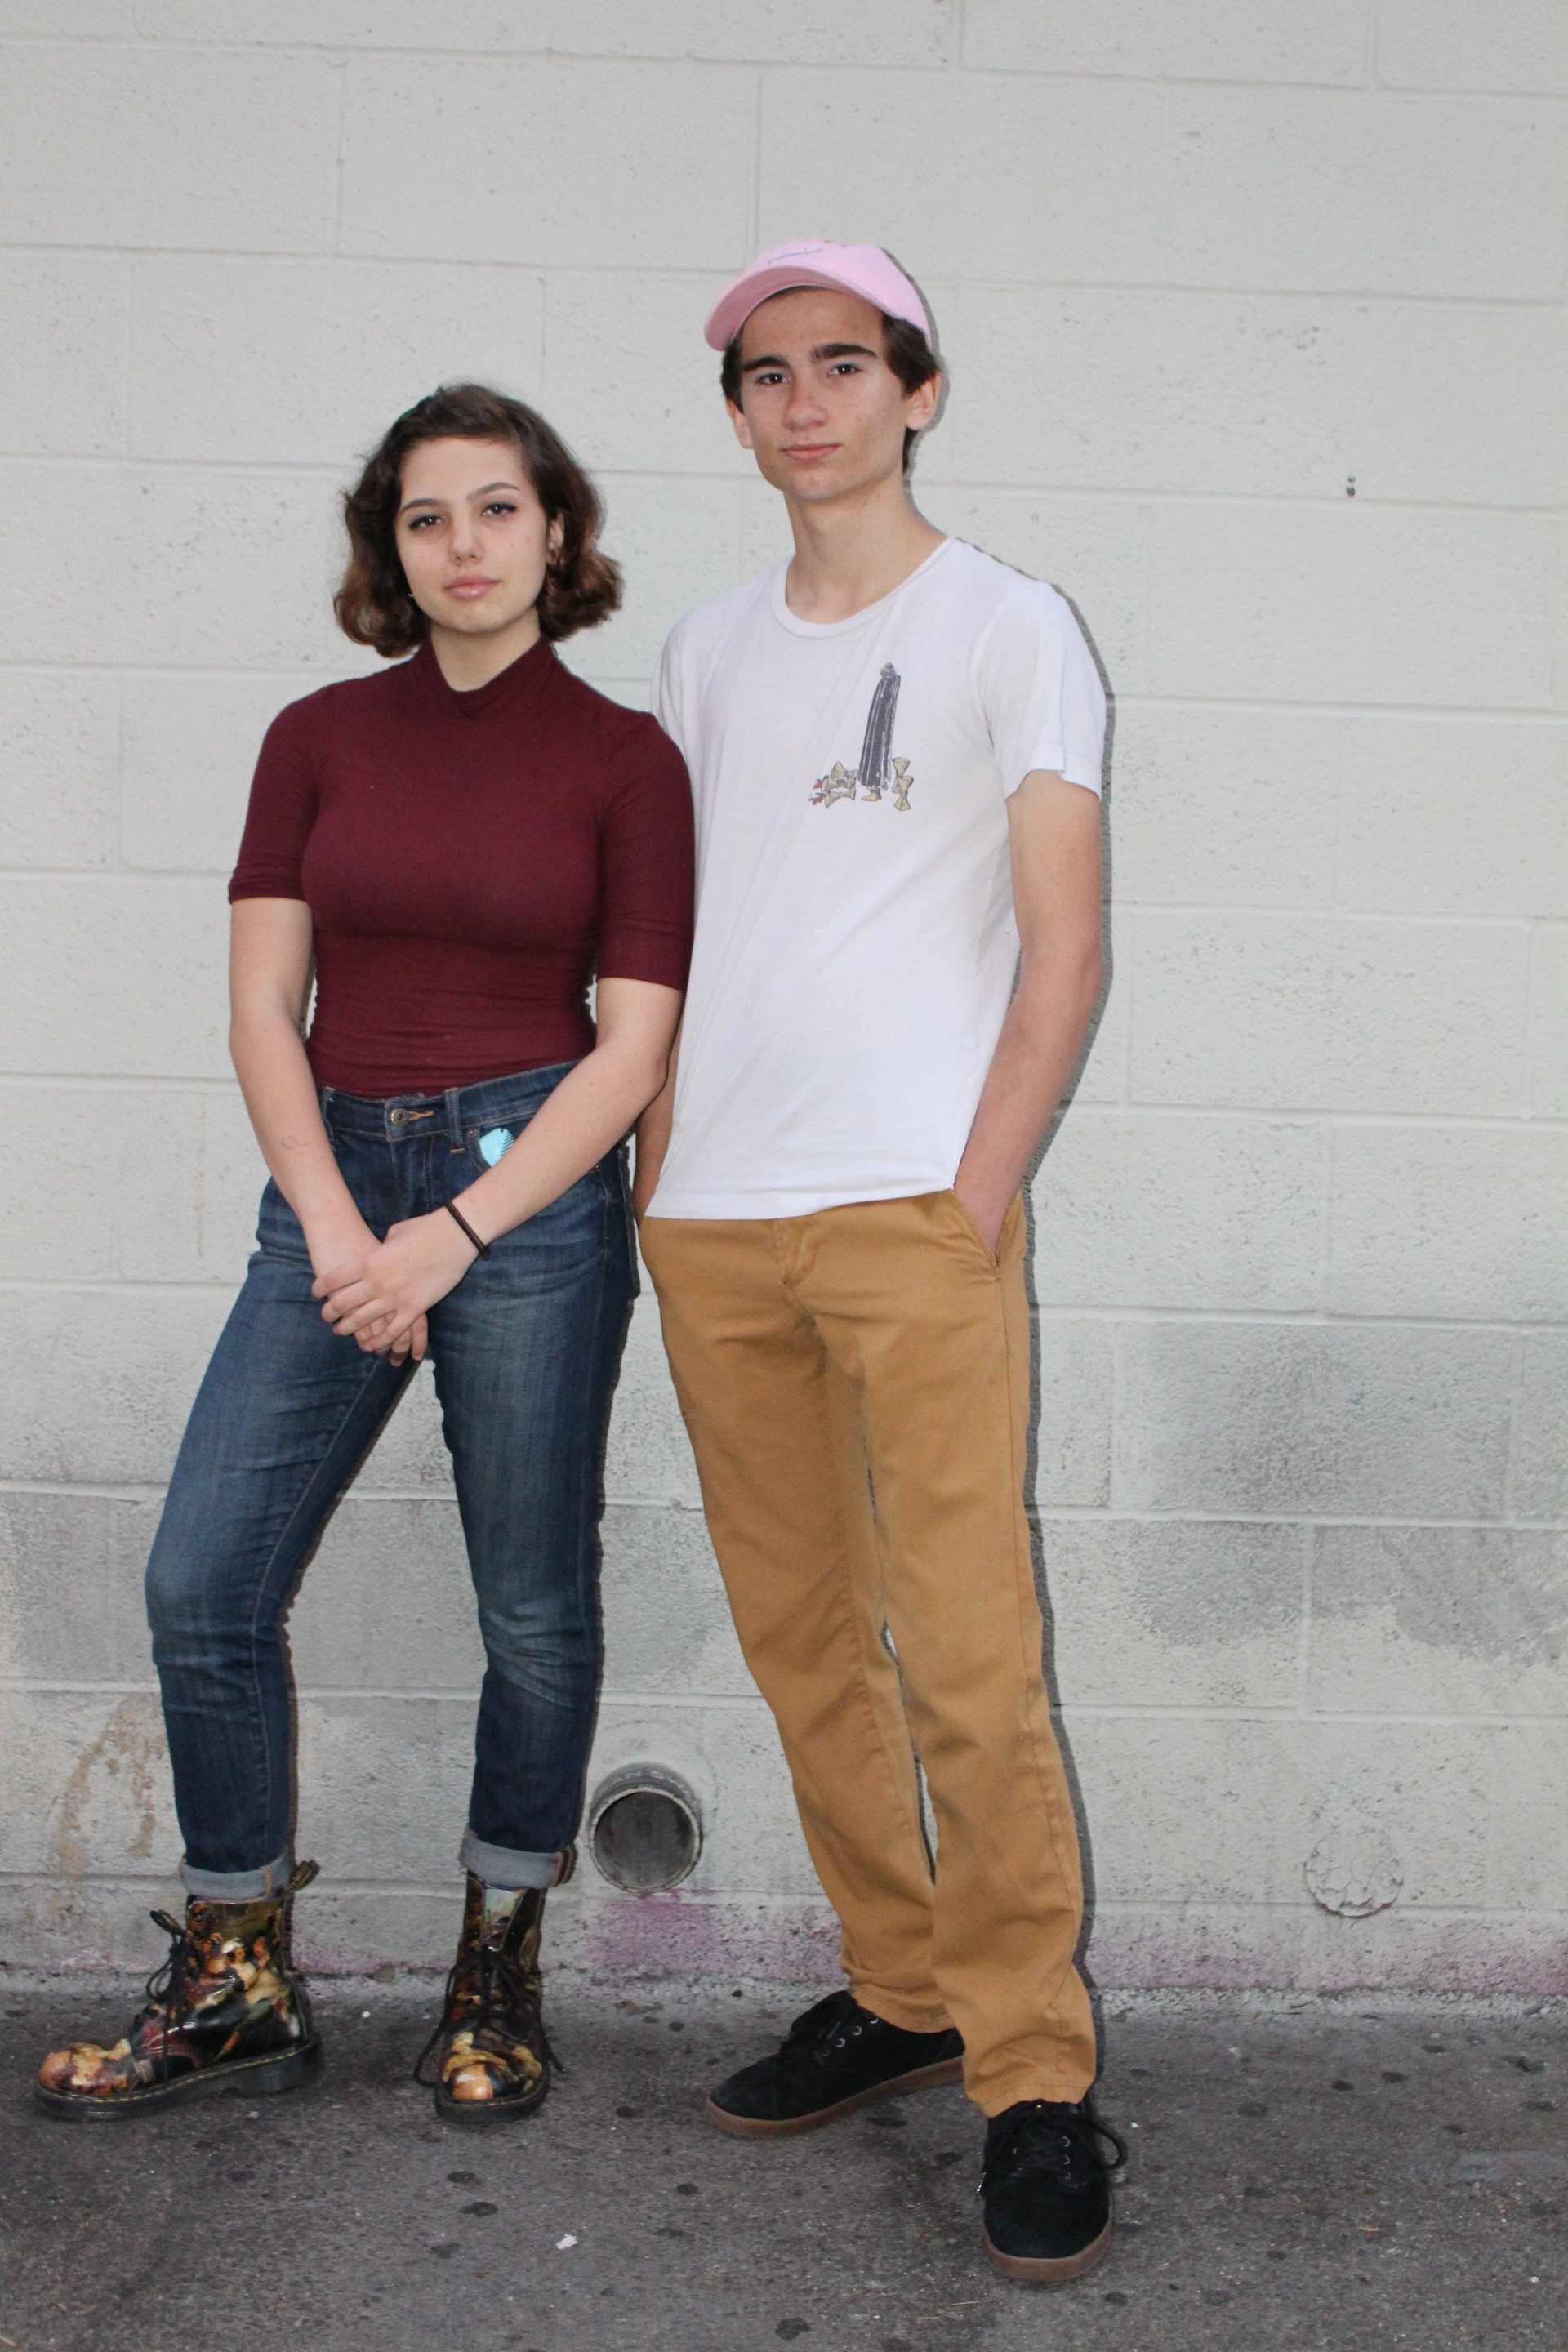 Gina Basile, 14, and Simon Landau, 15. “It’s very rare to find a place that treats the performers well and allows all ages,” Landau said.